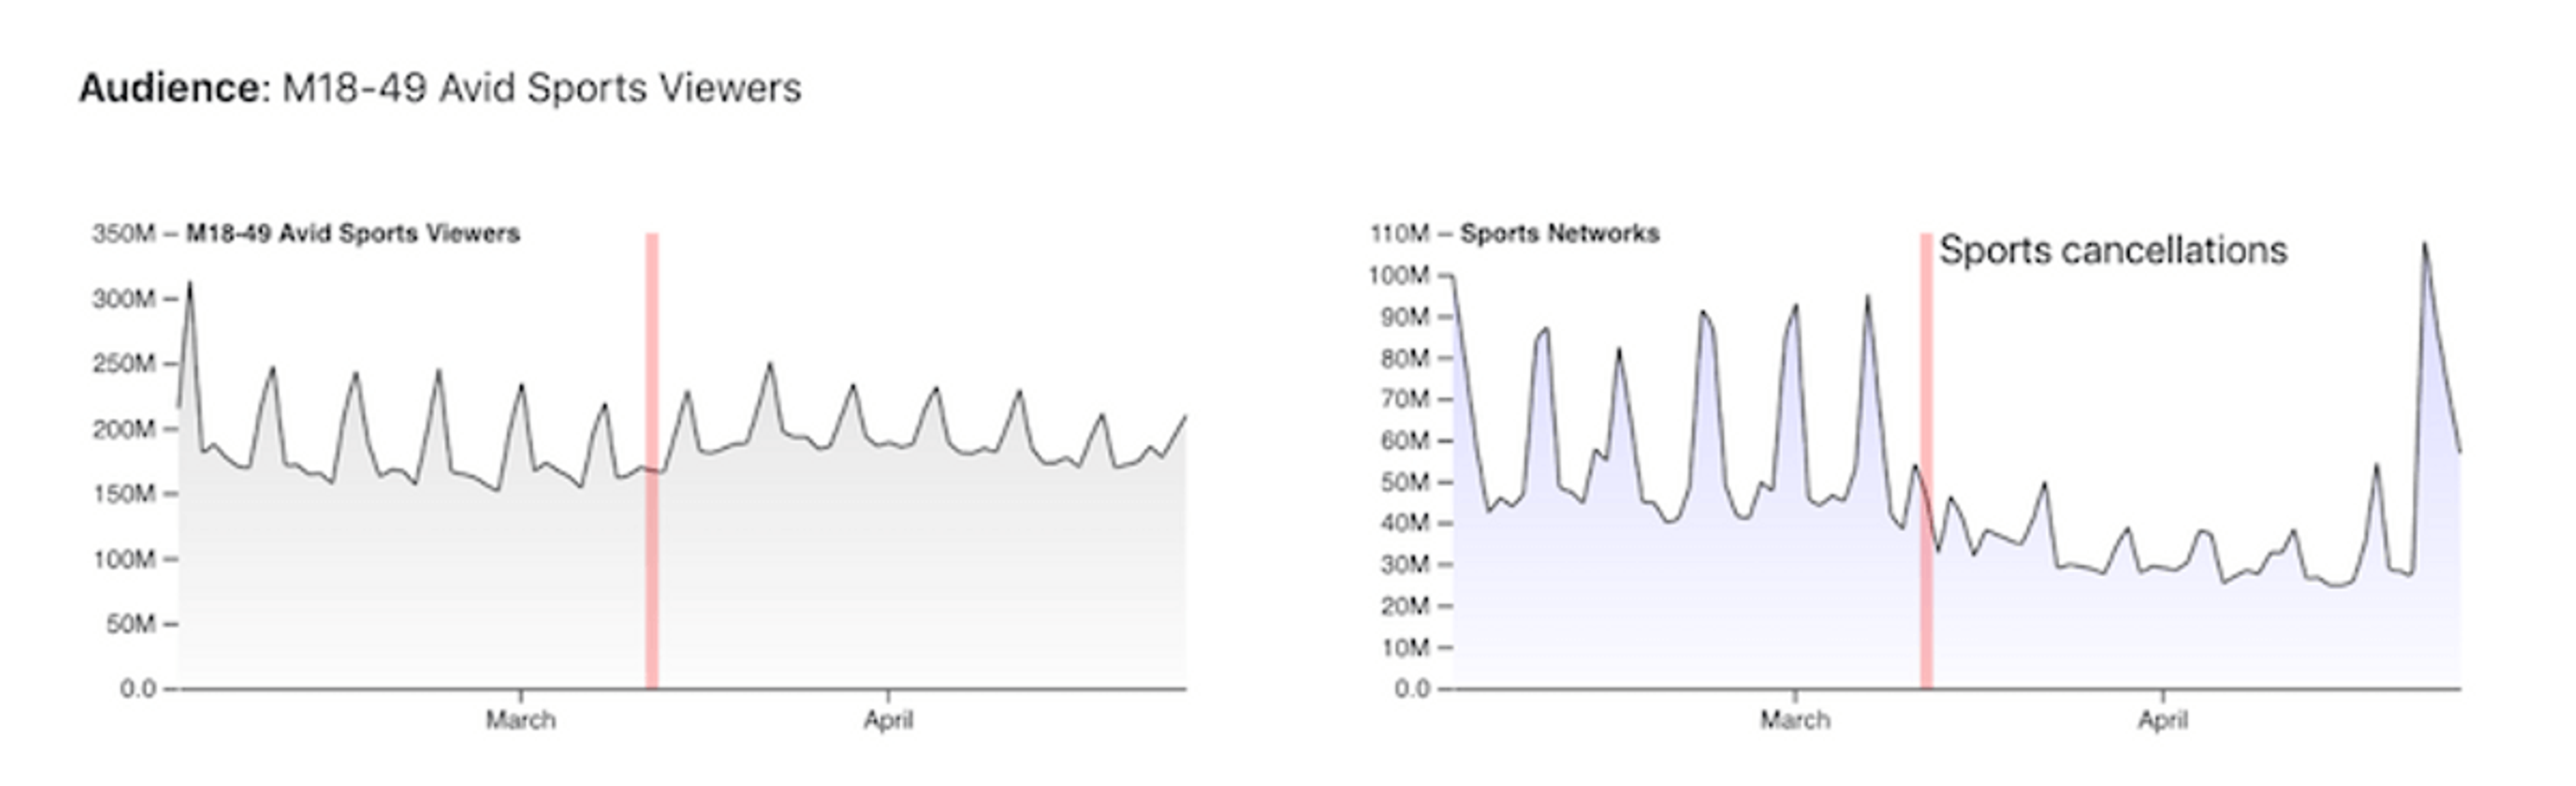 Two line charts showing the viewership of sports viewers and viewership of sports networks.